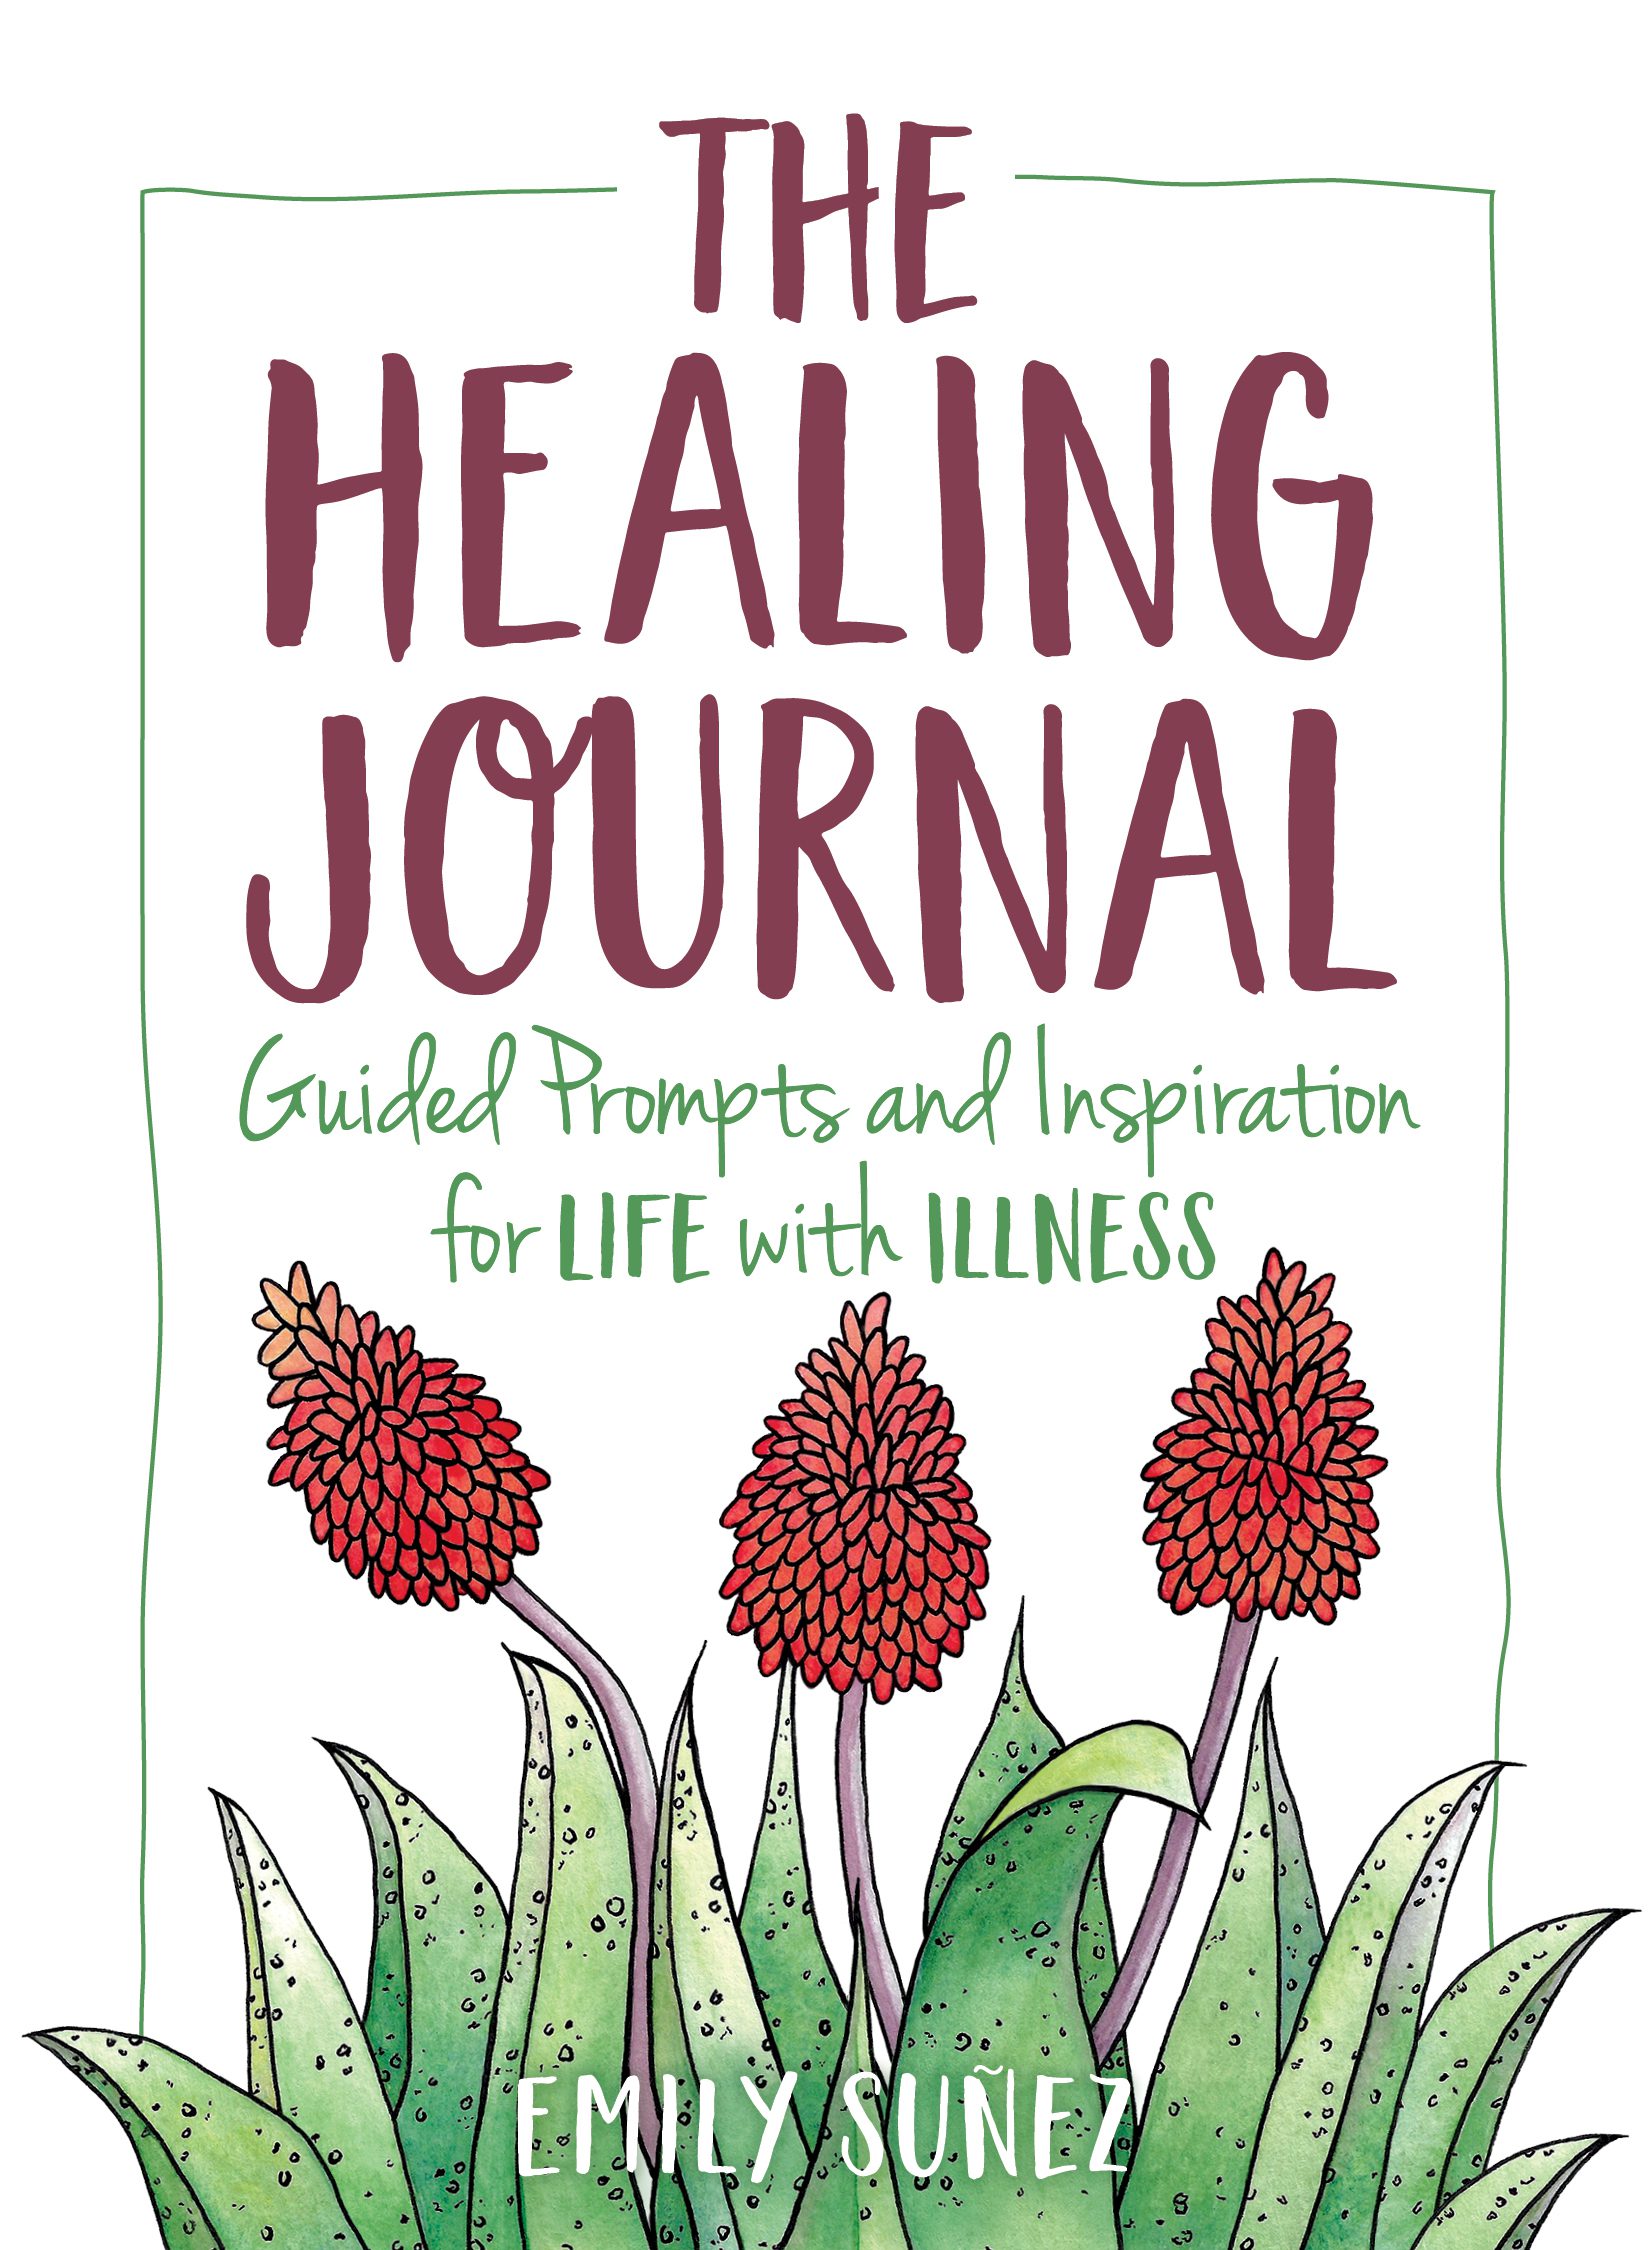 Review of The Healing Journal: Guided Prompts and Inspiration for Life with Illness